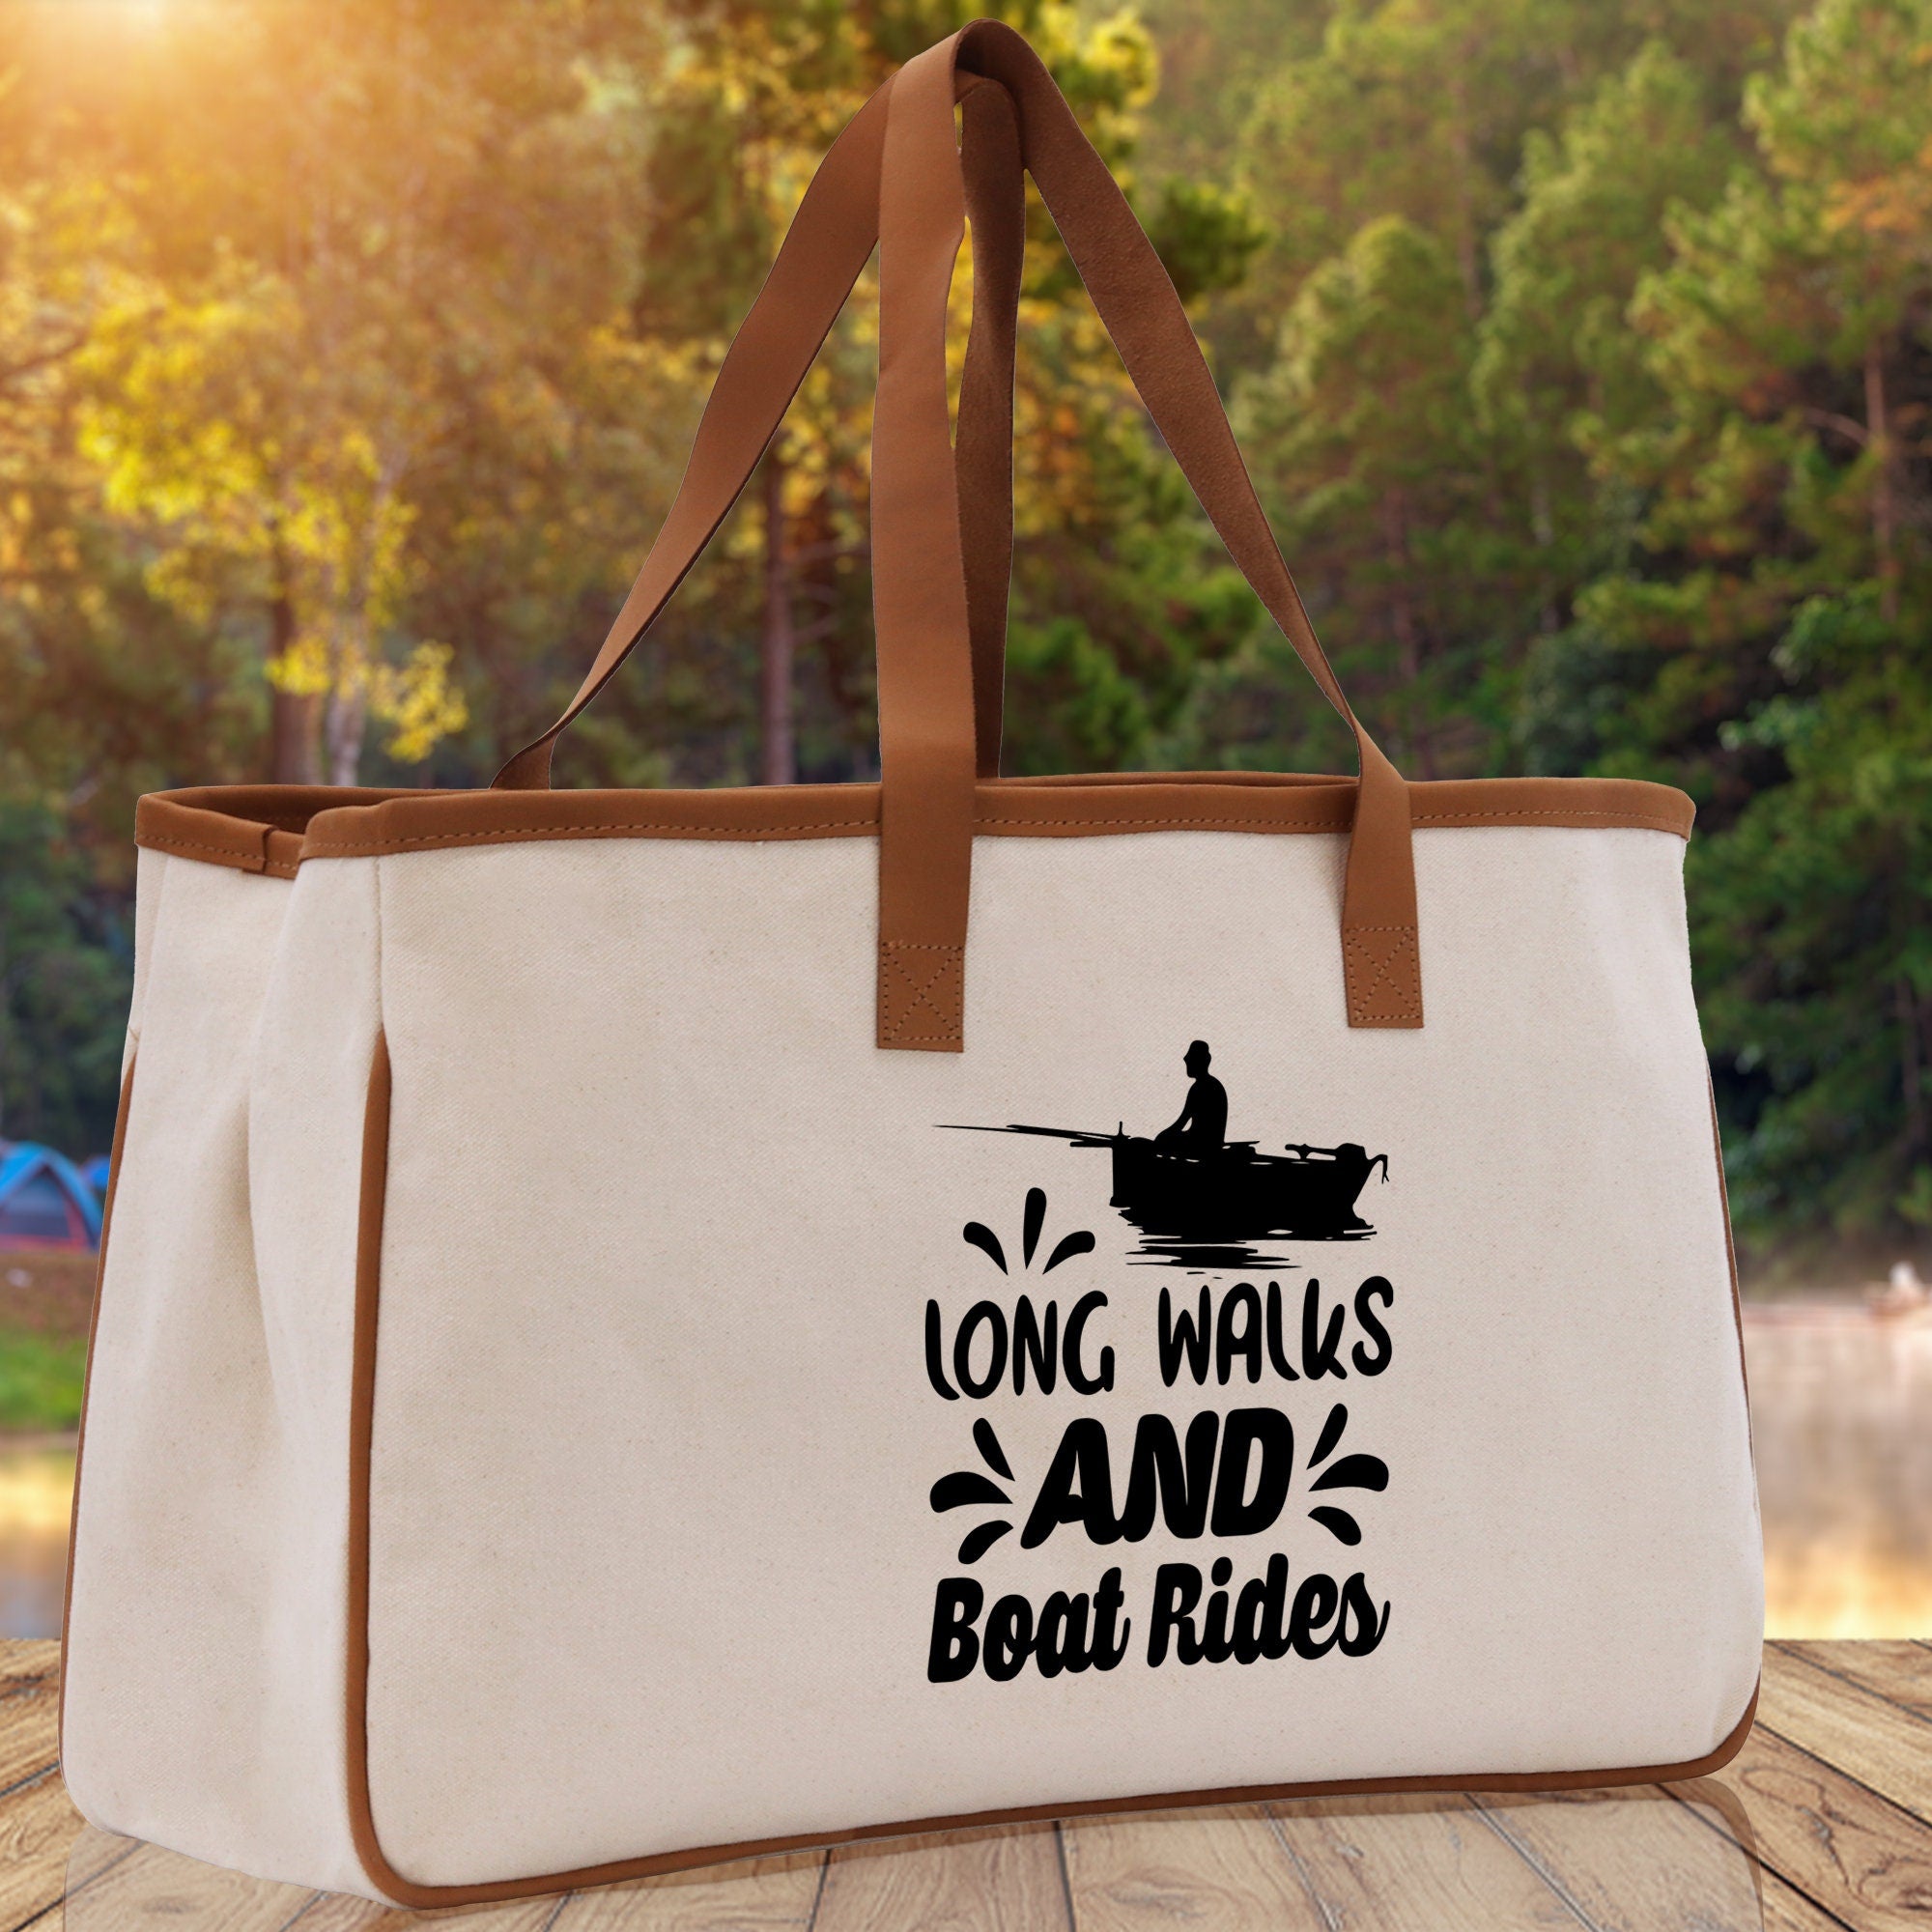 Long Walks and Boat Rides Cotton Canvas Chic Tote Bag  Boat Lover Gift Tote Bag Outdoor Tote Weekender Tote Boater Tote Multipurpose Tote